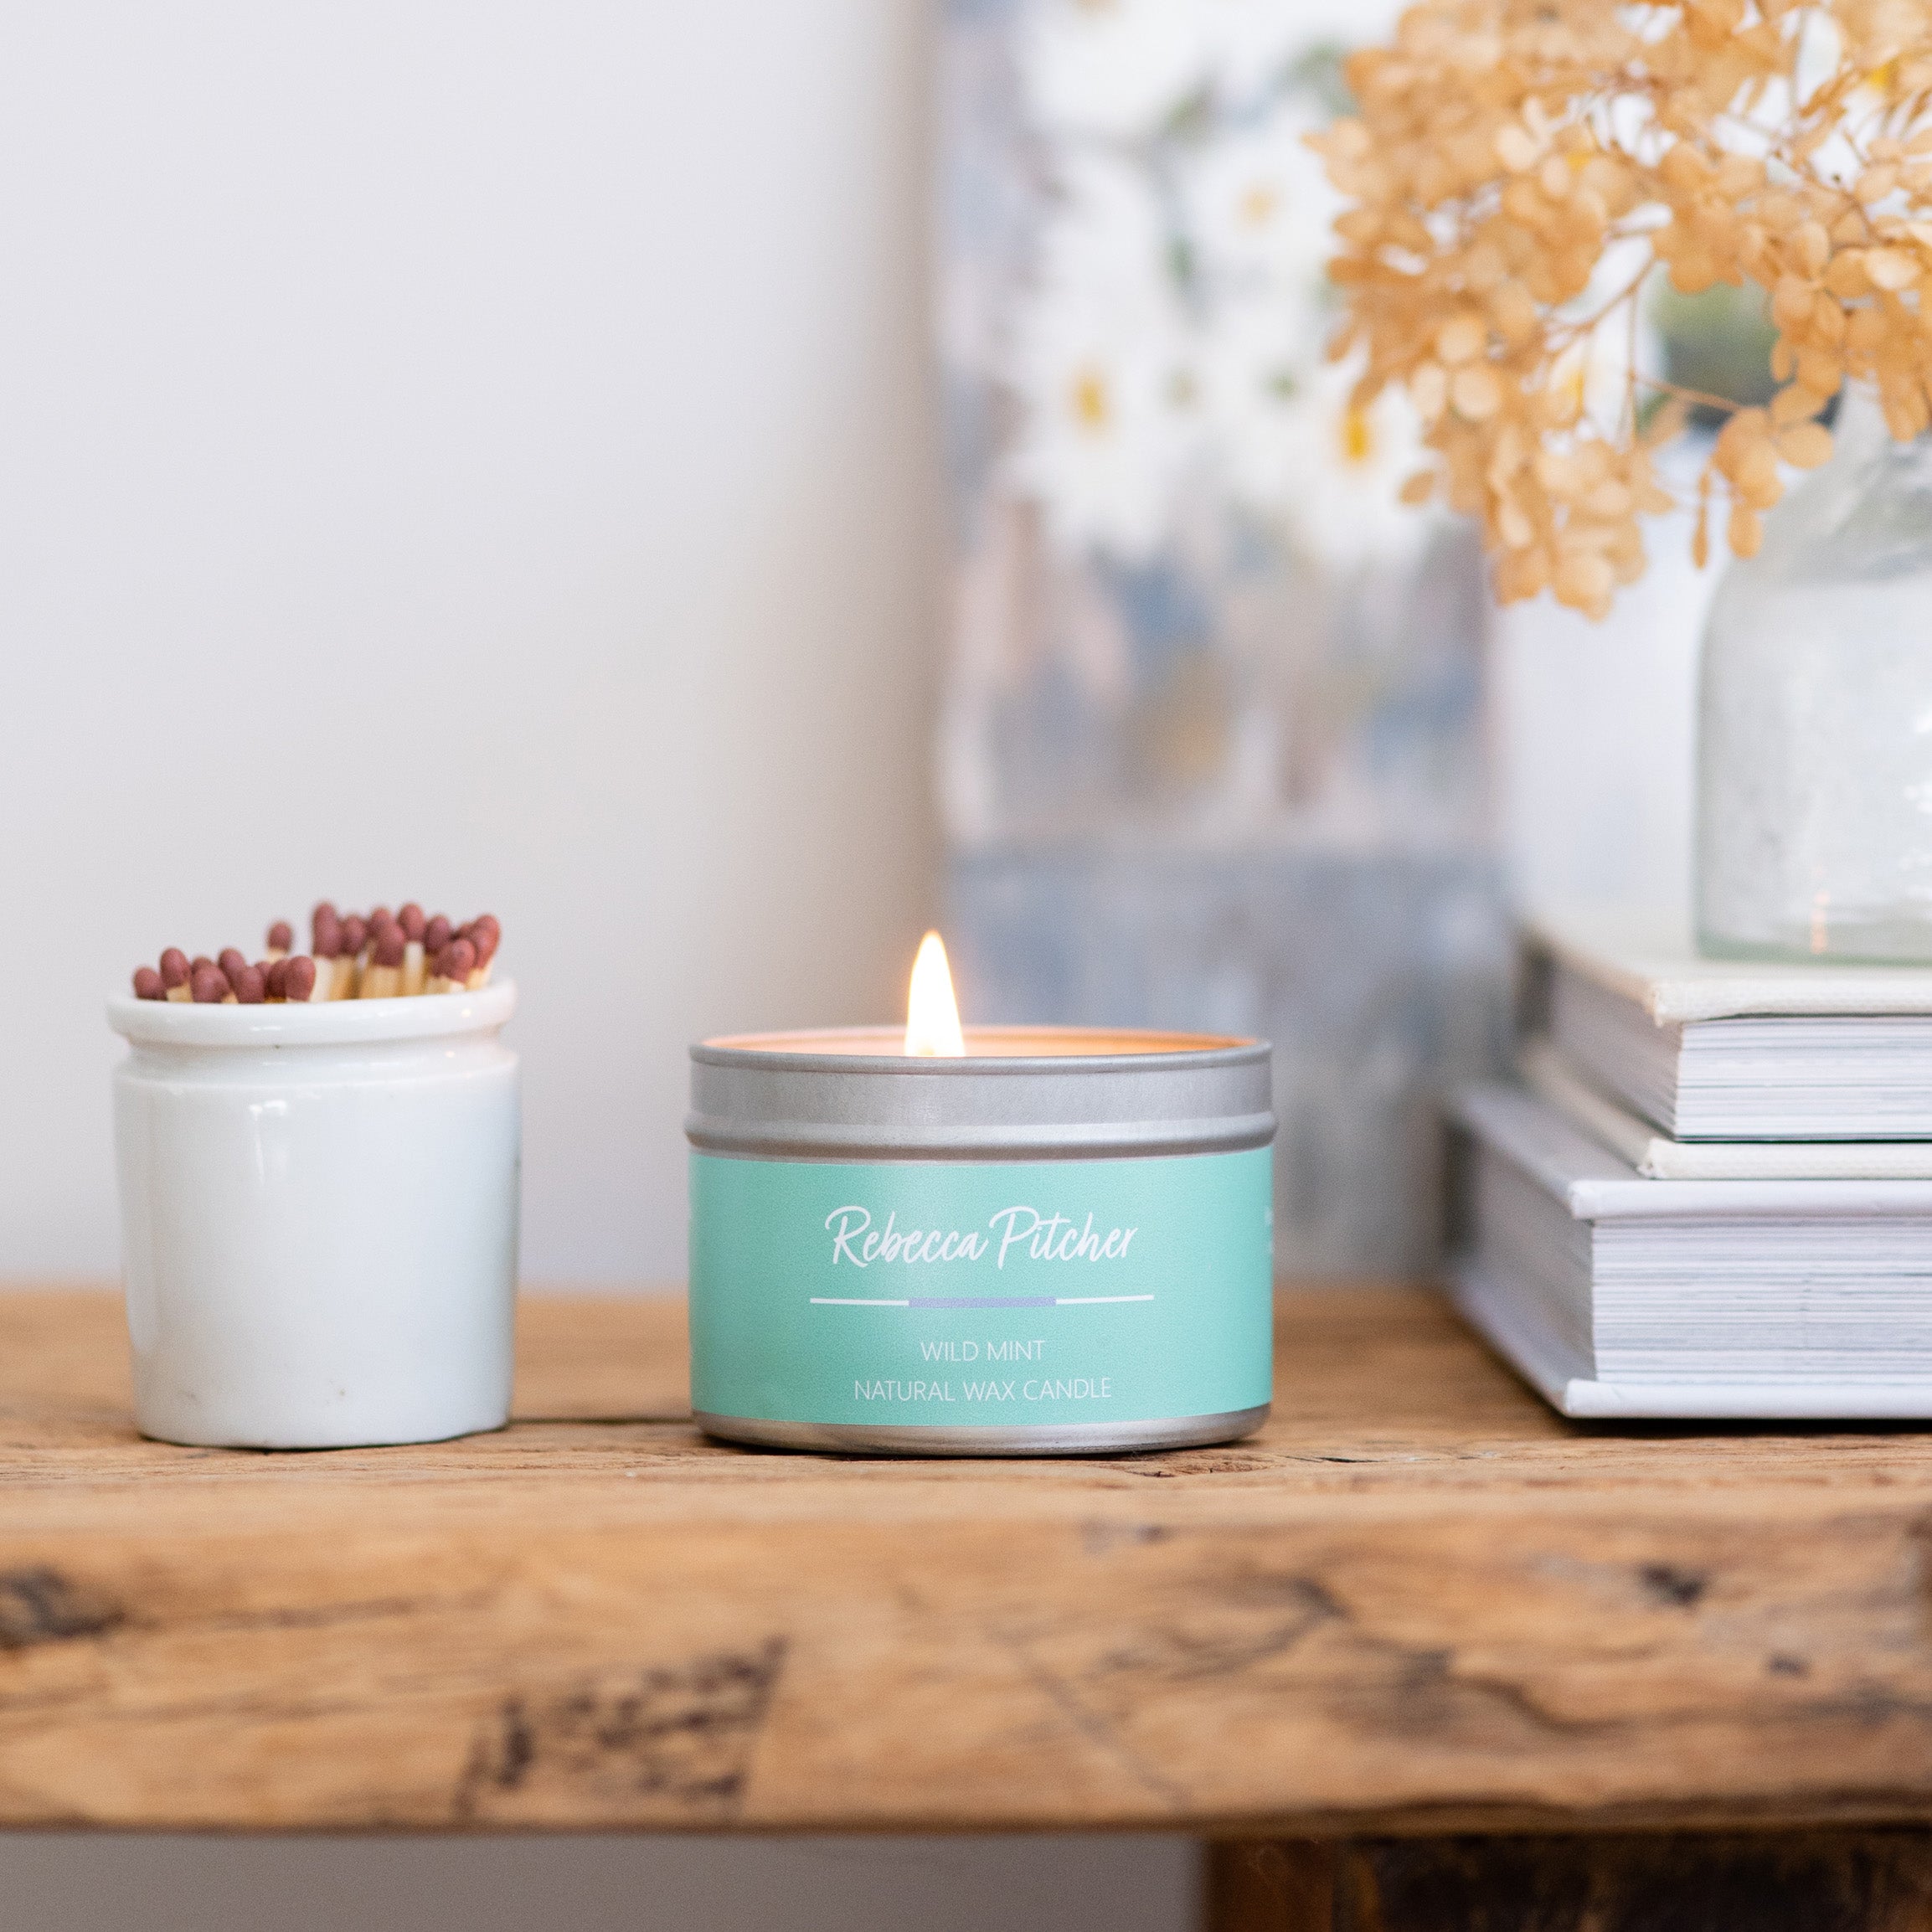 Wild Mint Tin Candle by Rebecca Pitcher